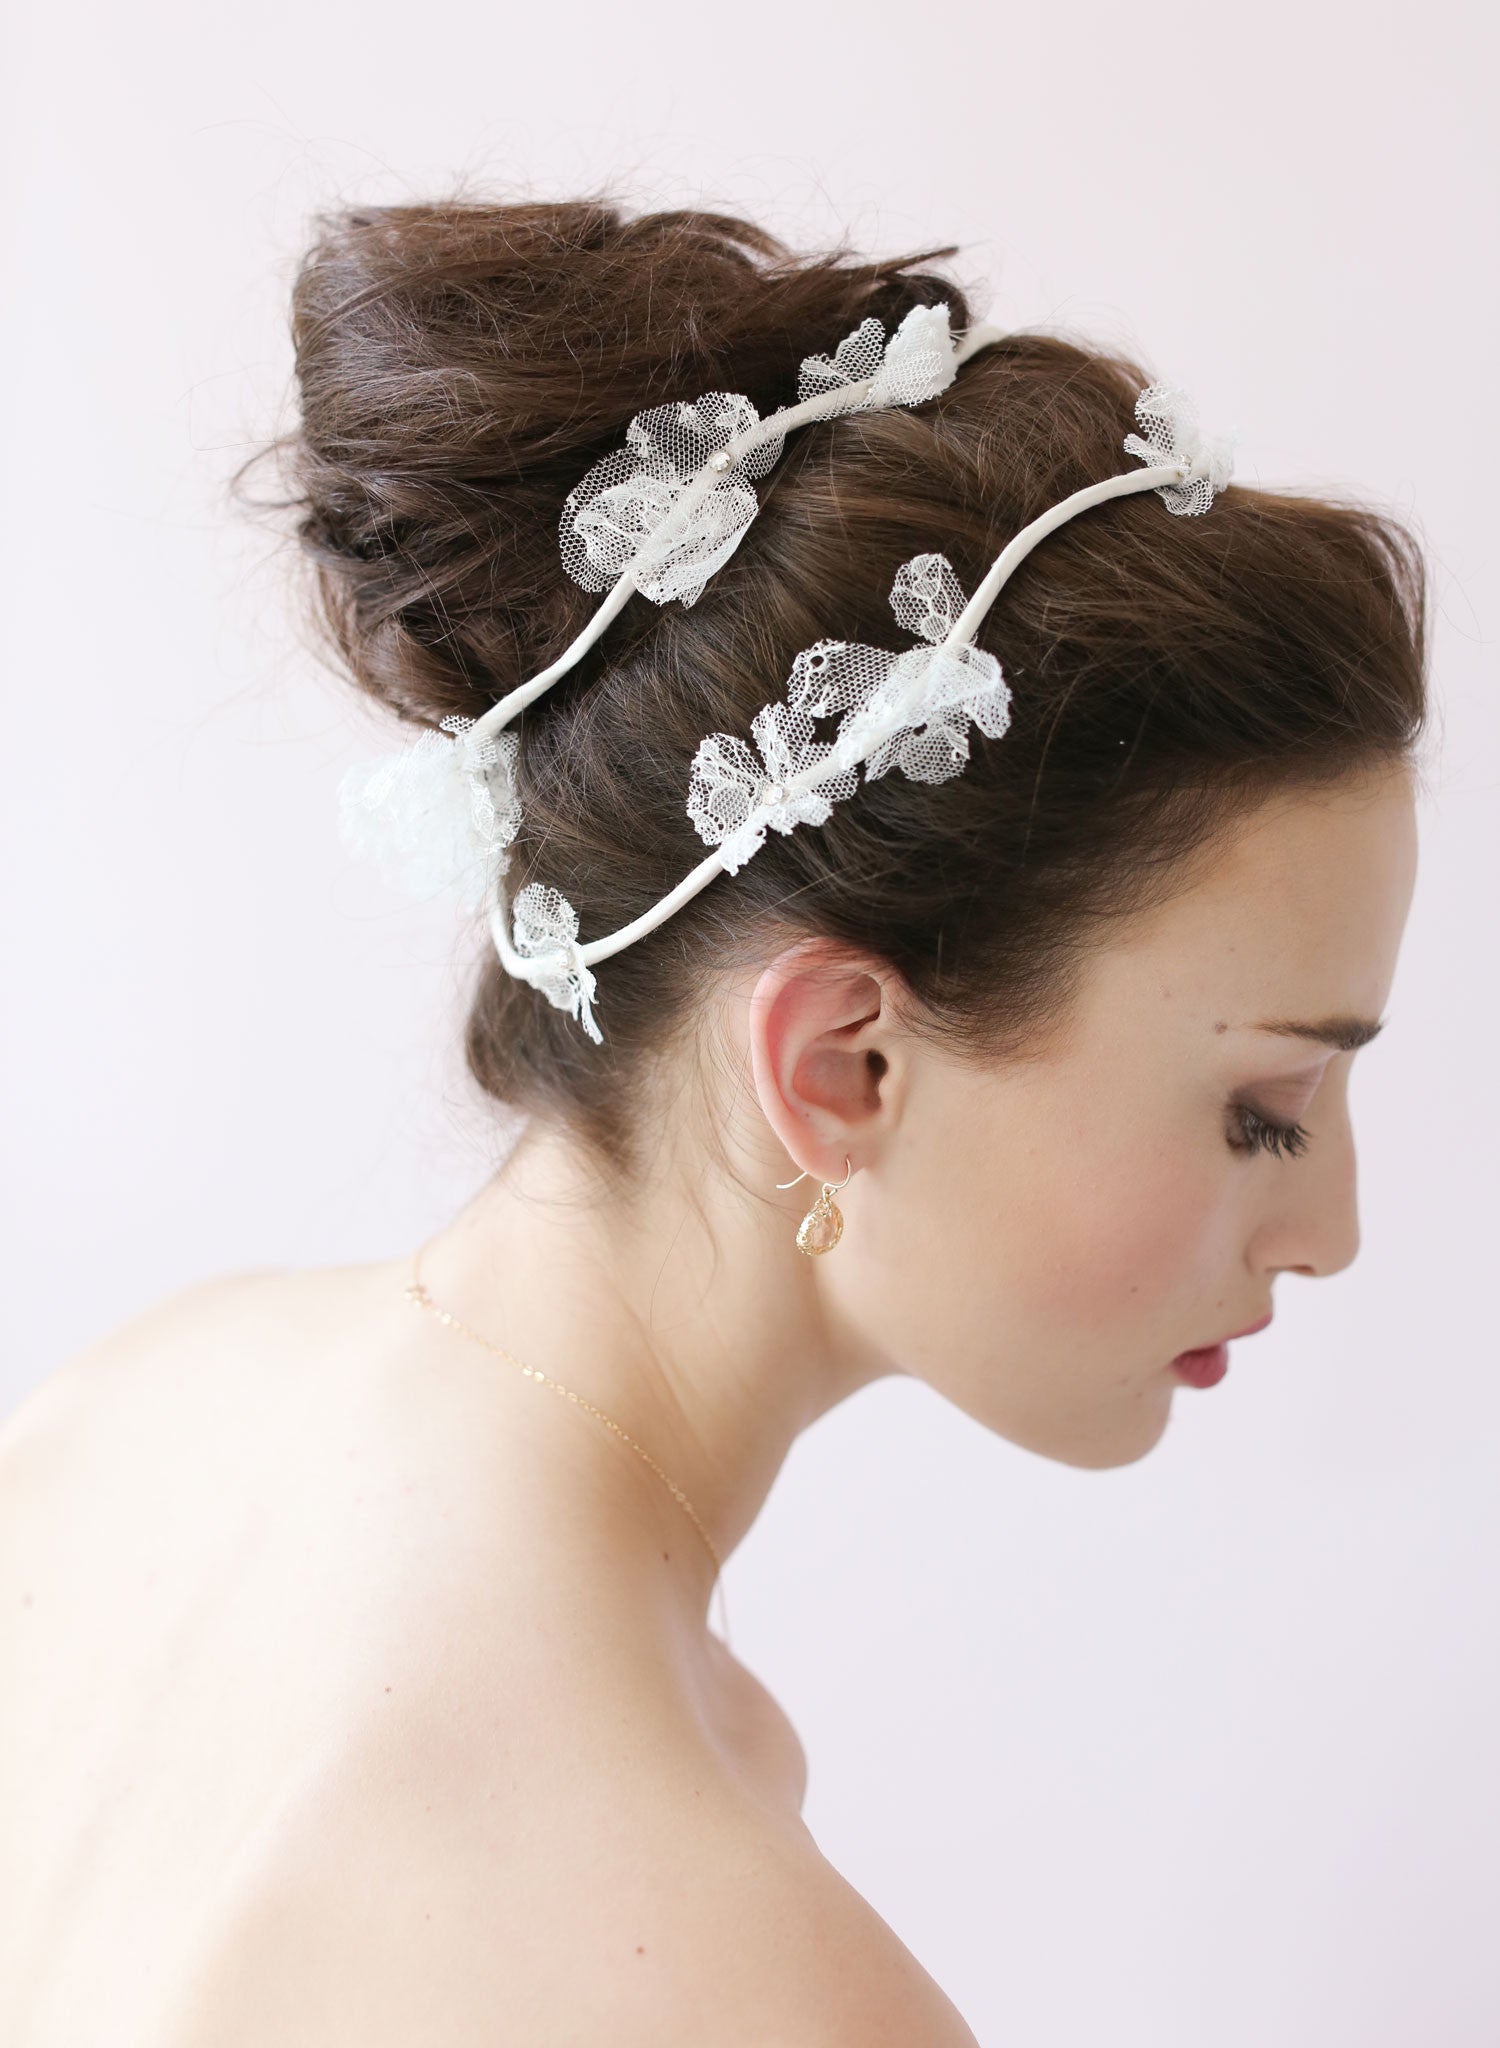 Updo Hair Accessory by Twigs & Honey 